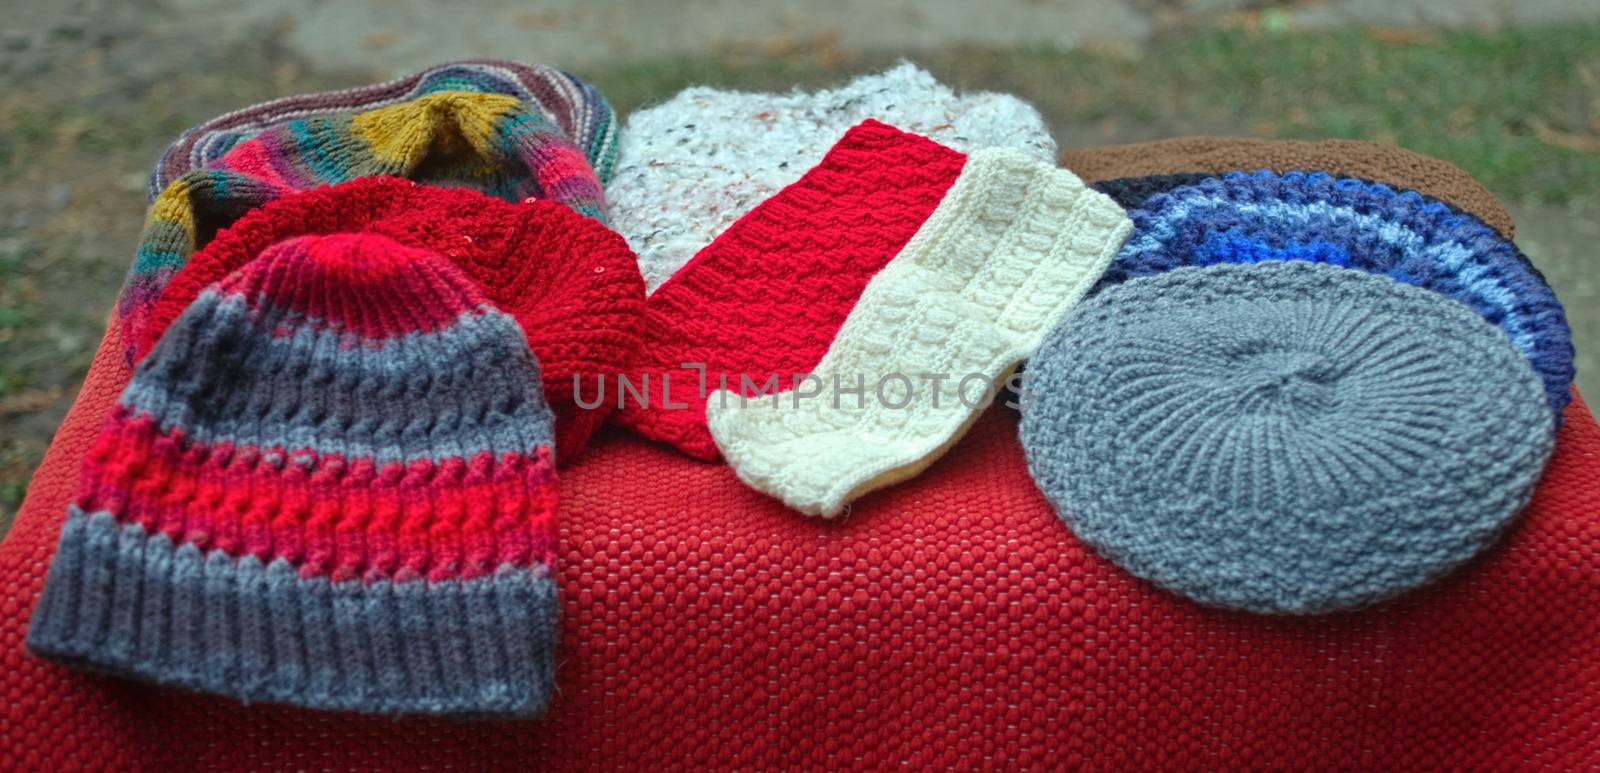 Many colorful handmade traditional winter hats on table by sheriffkule